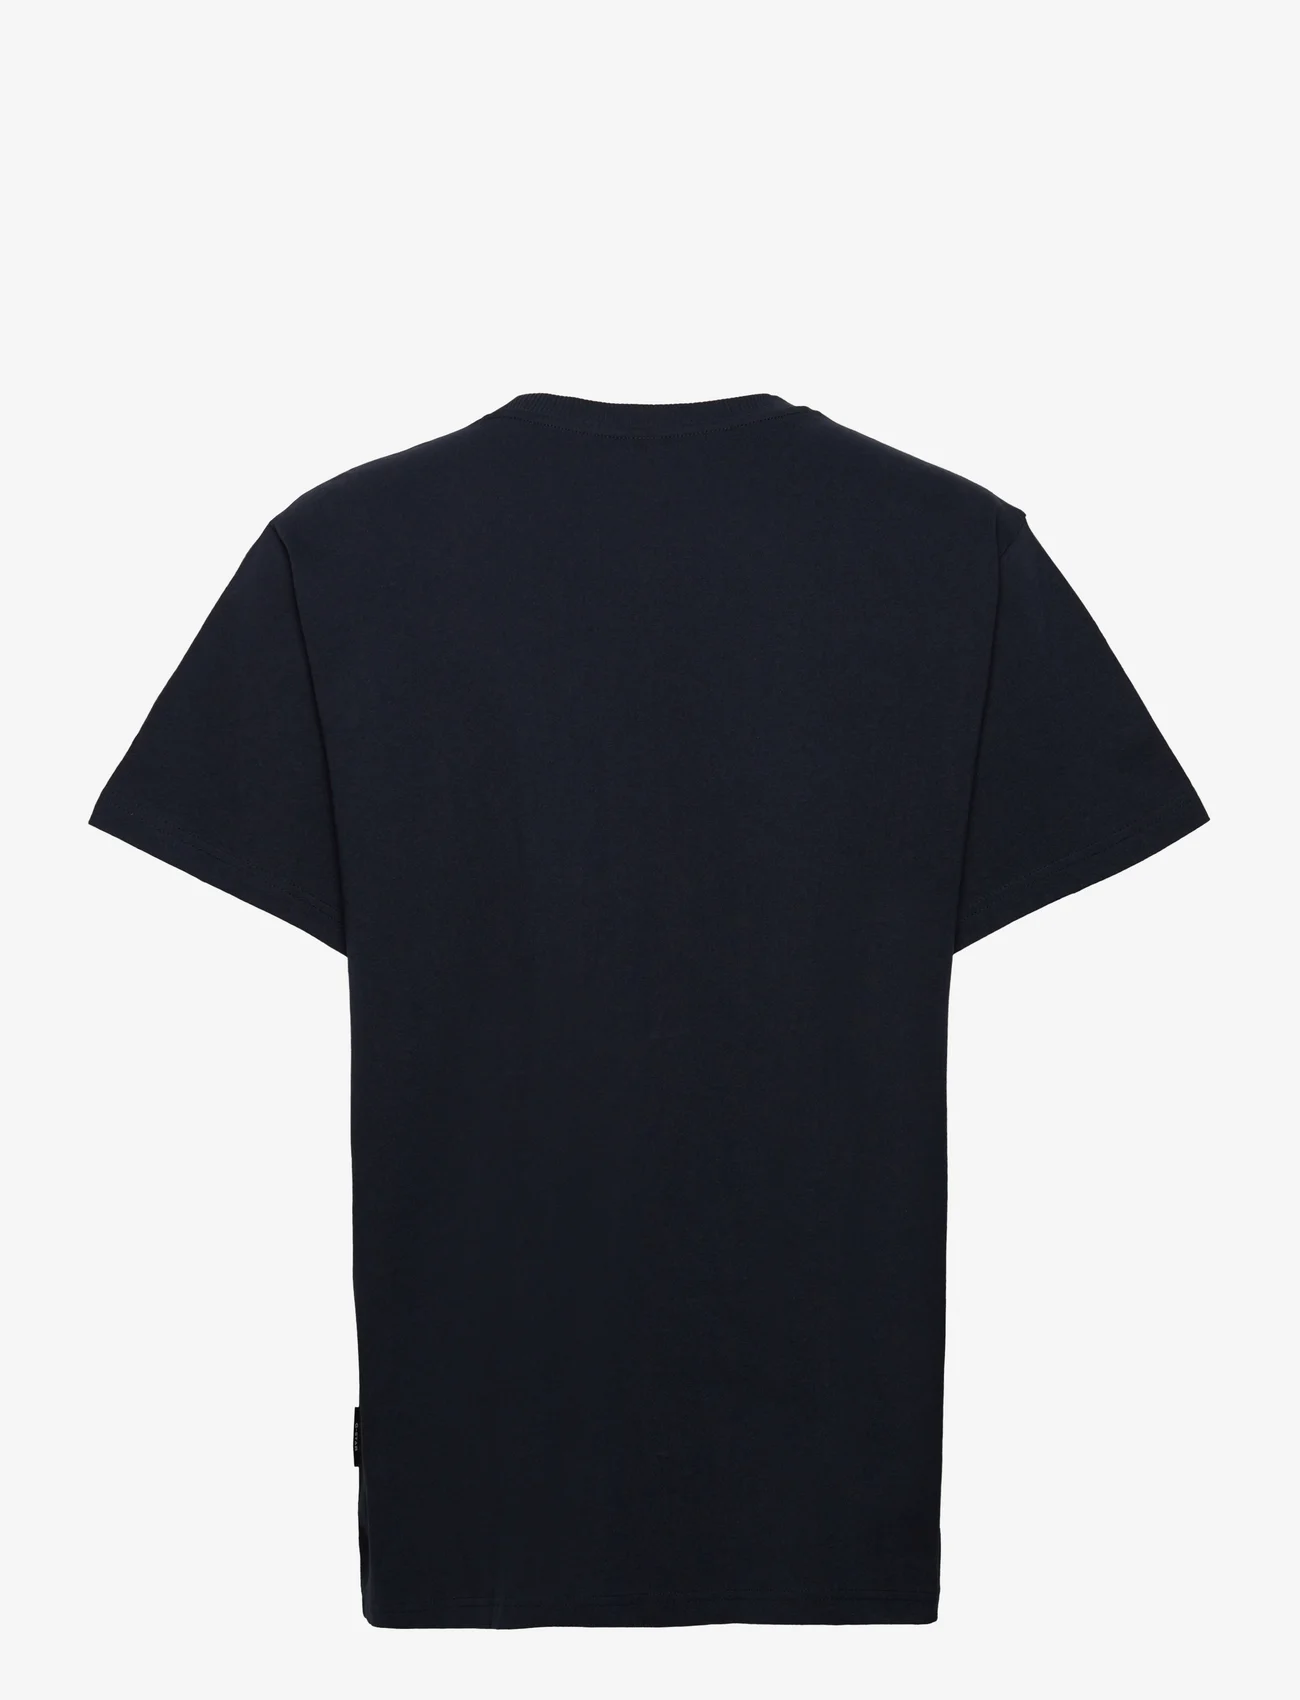 G-Star RAW - Loose r t s\s - lowest prices - salute - 1